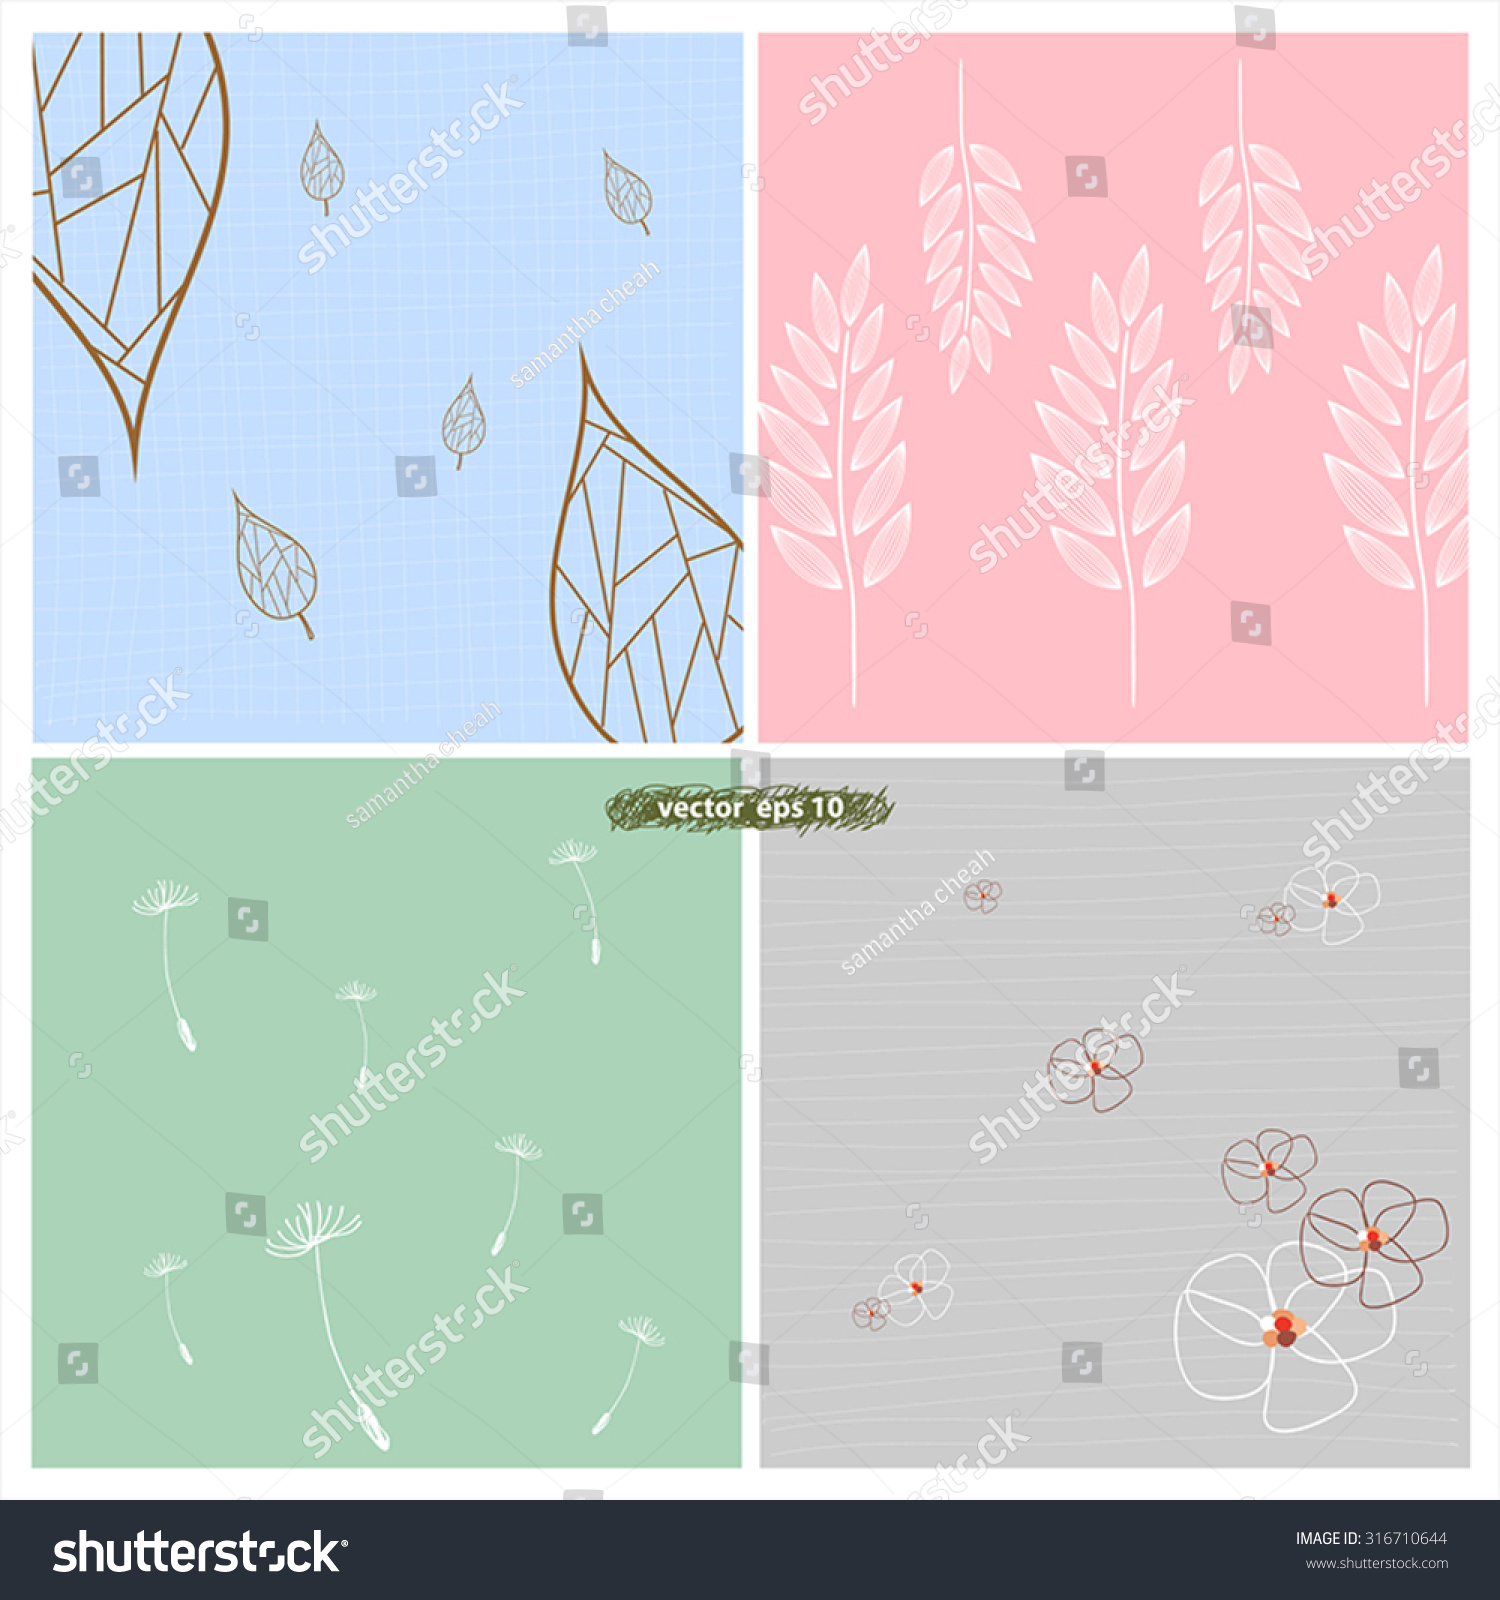 Vector Drawing Flora Set Colorful Background Stock Vector Royalty Images, Photos, Reviews